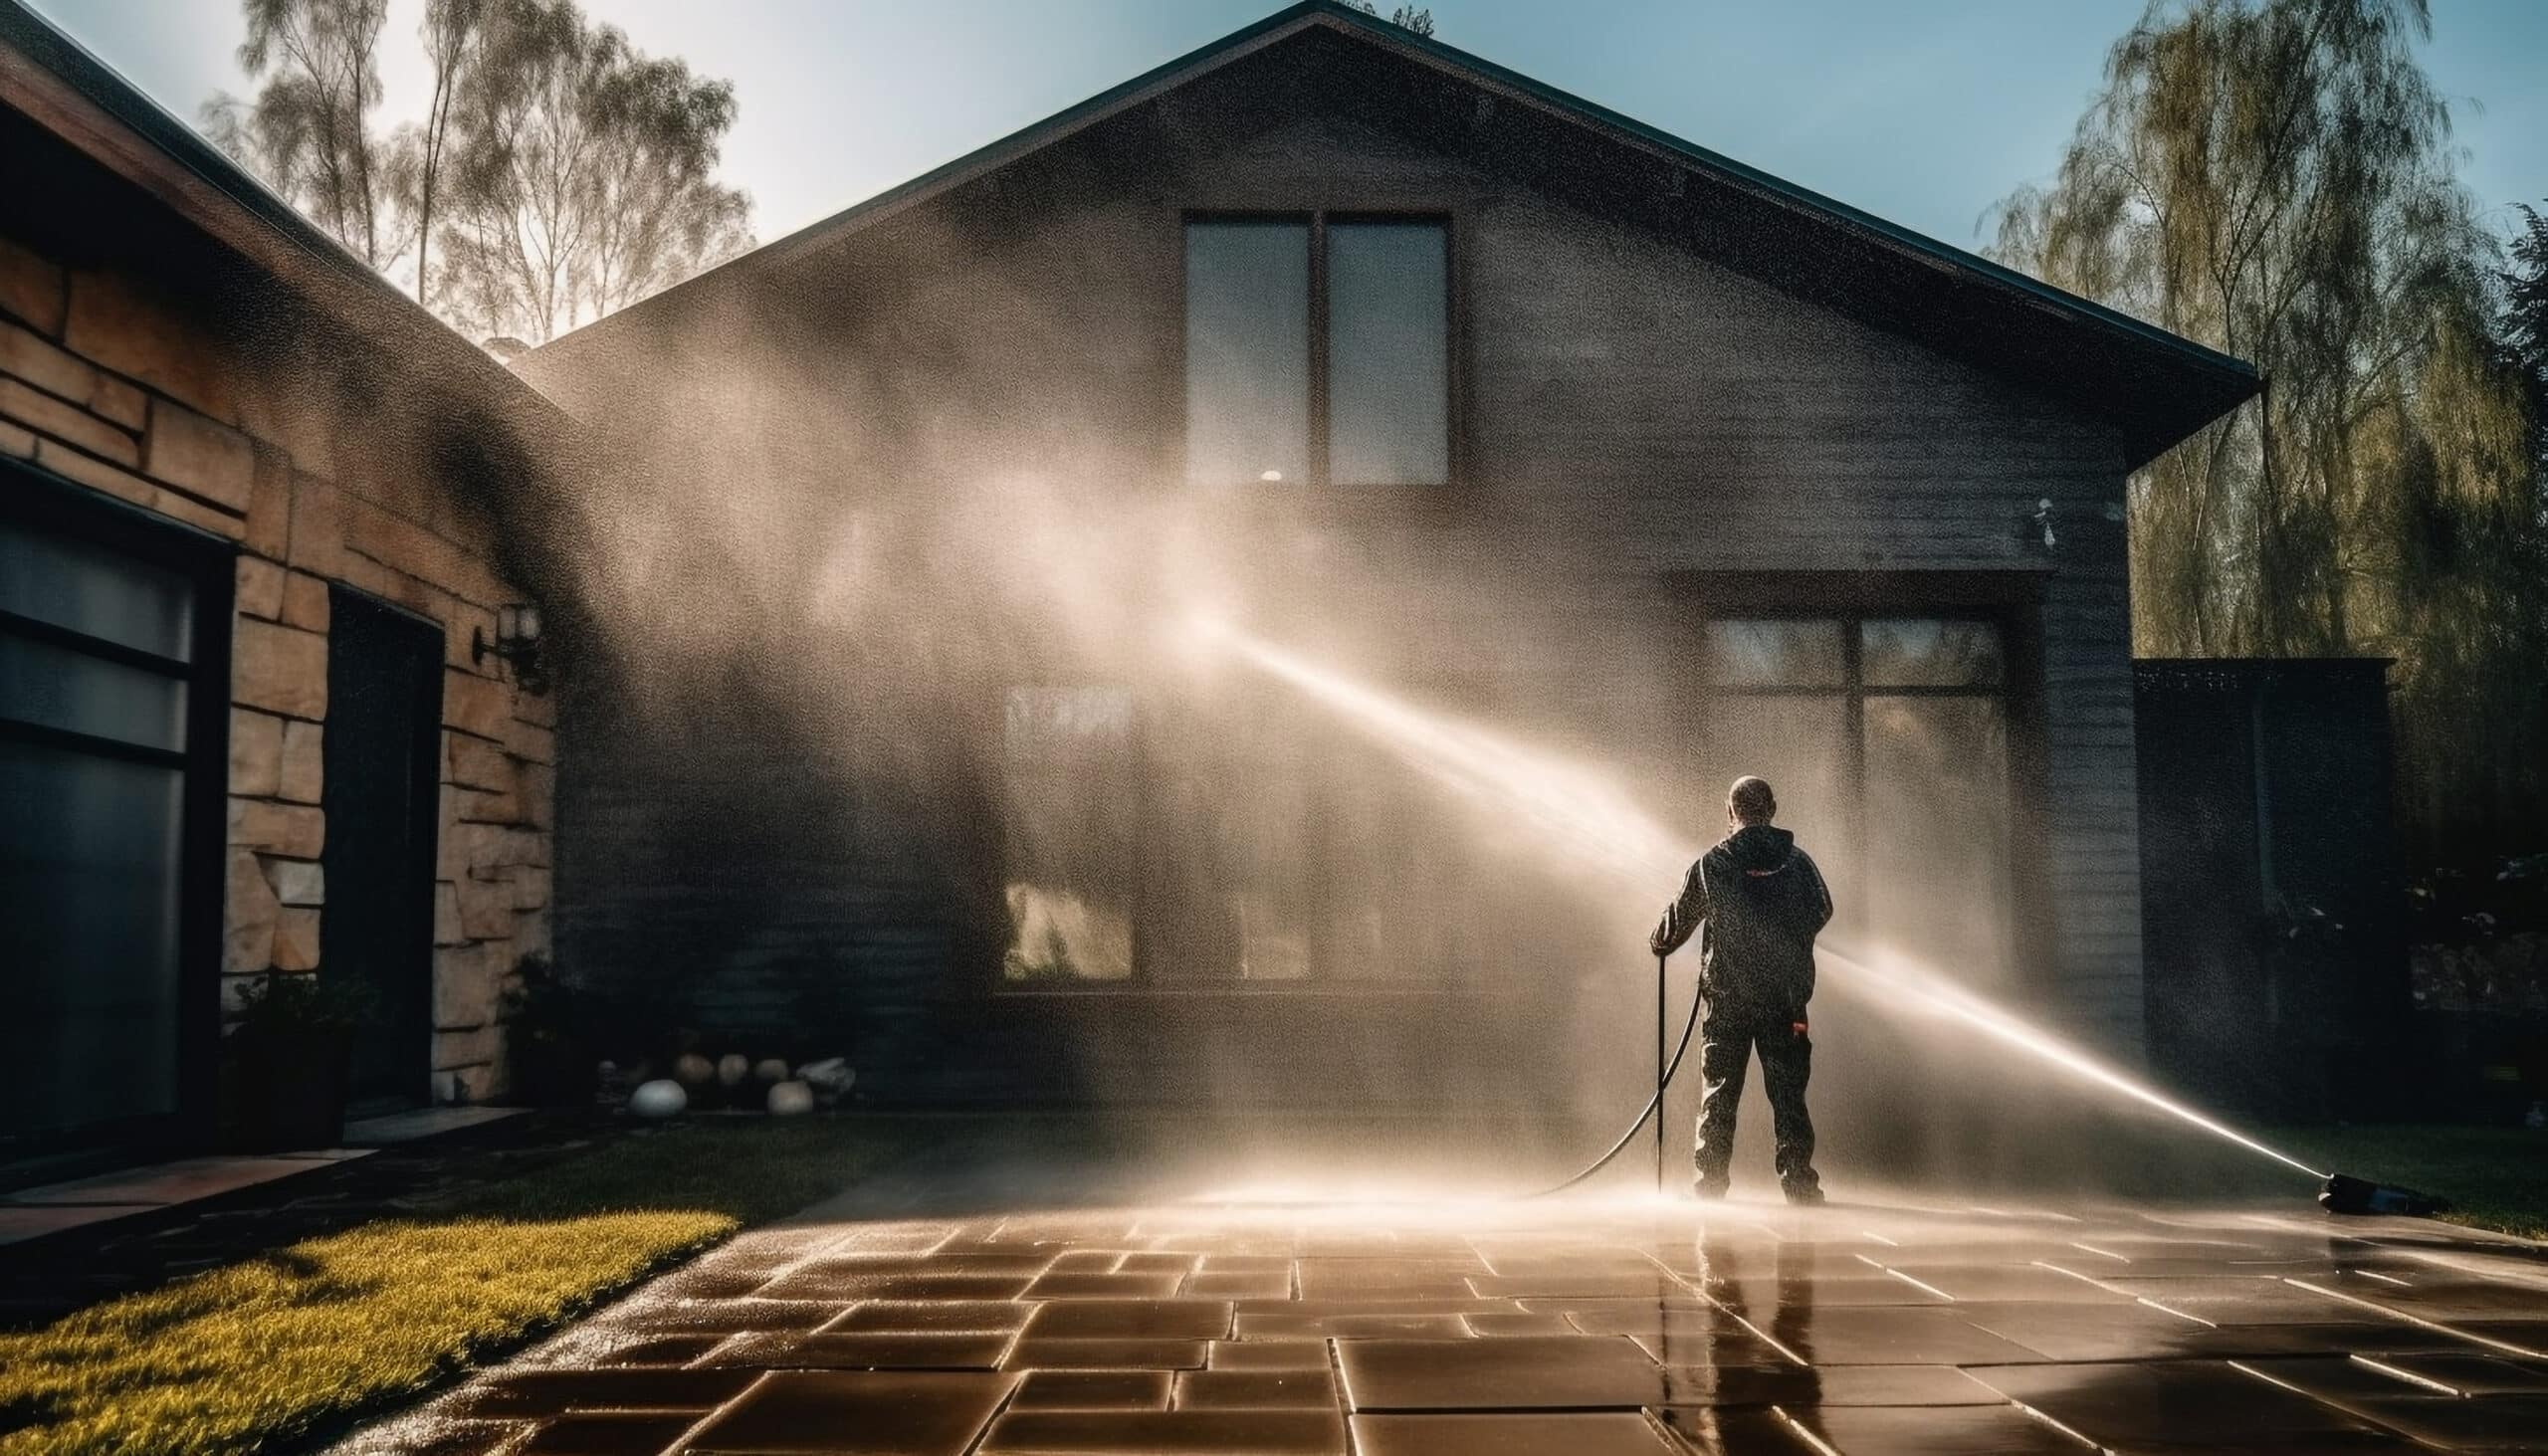 www.appr.com : How do I maintain my electric pressure washer?